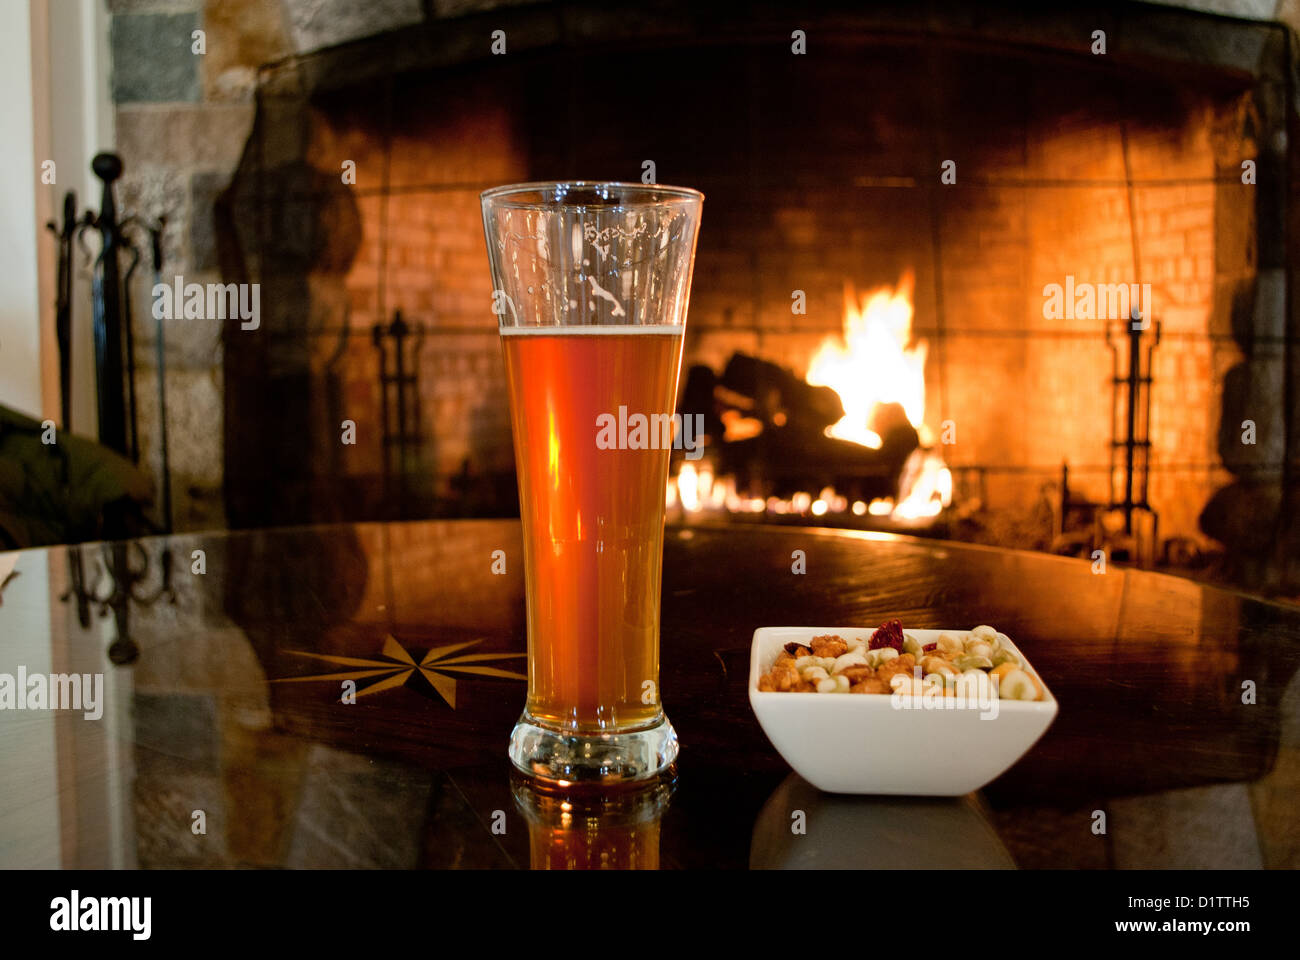 A glass of beer in front of the fireplace. Stock Photo